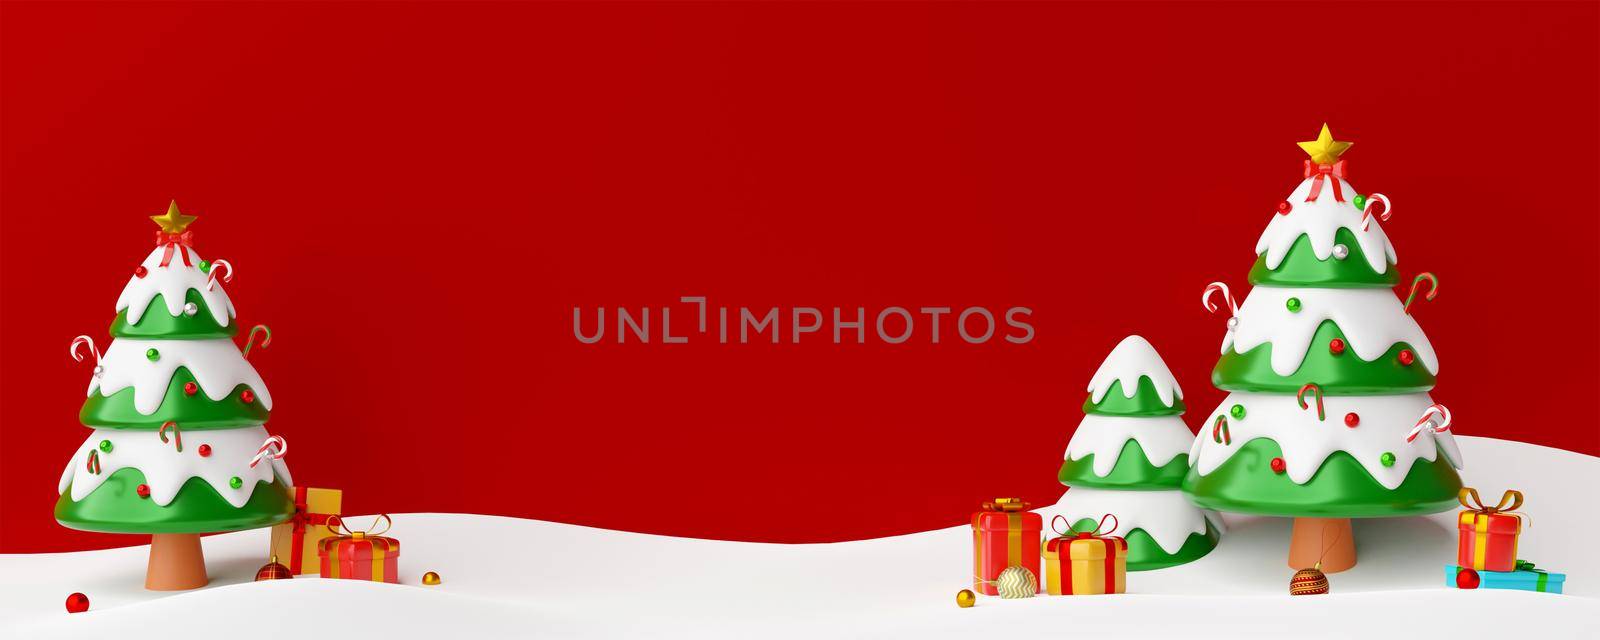 Christmas banner postcard scene of Christmas tree with presents, 3d illustration by nutzchotwarut